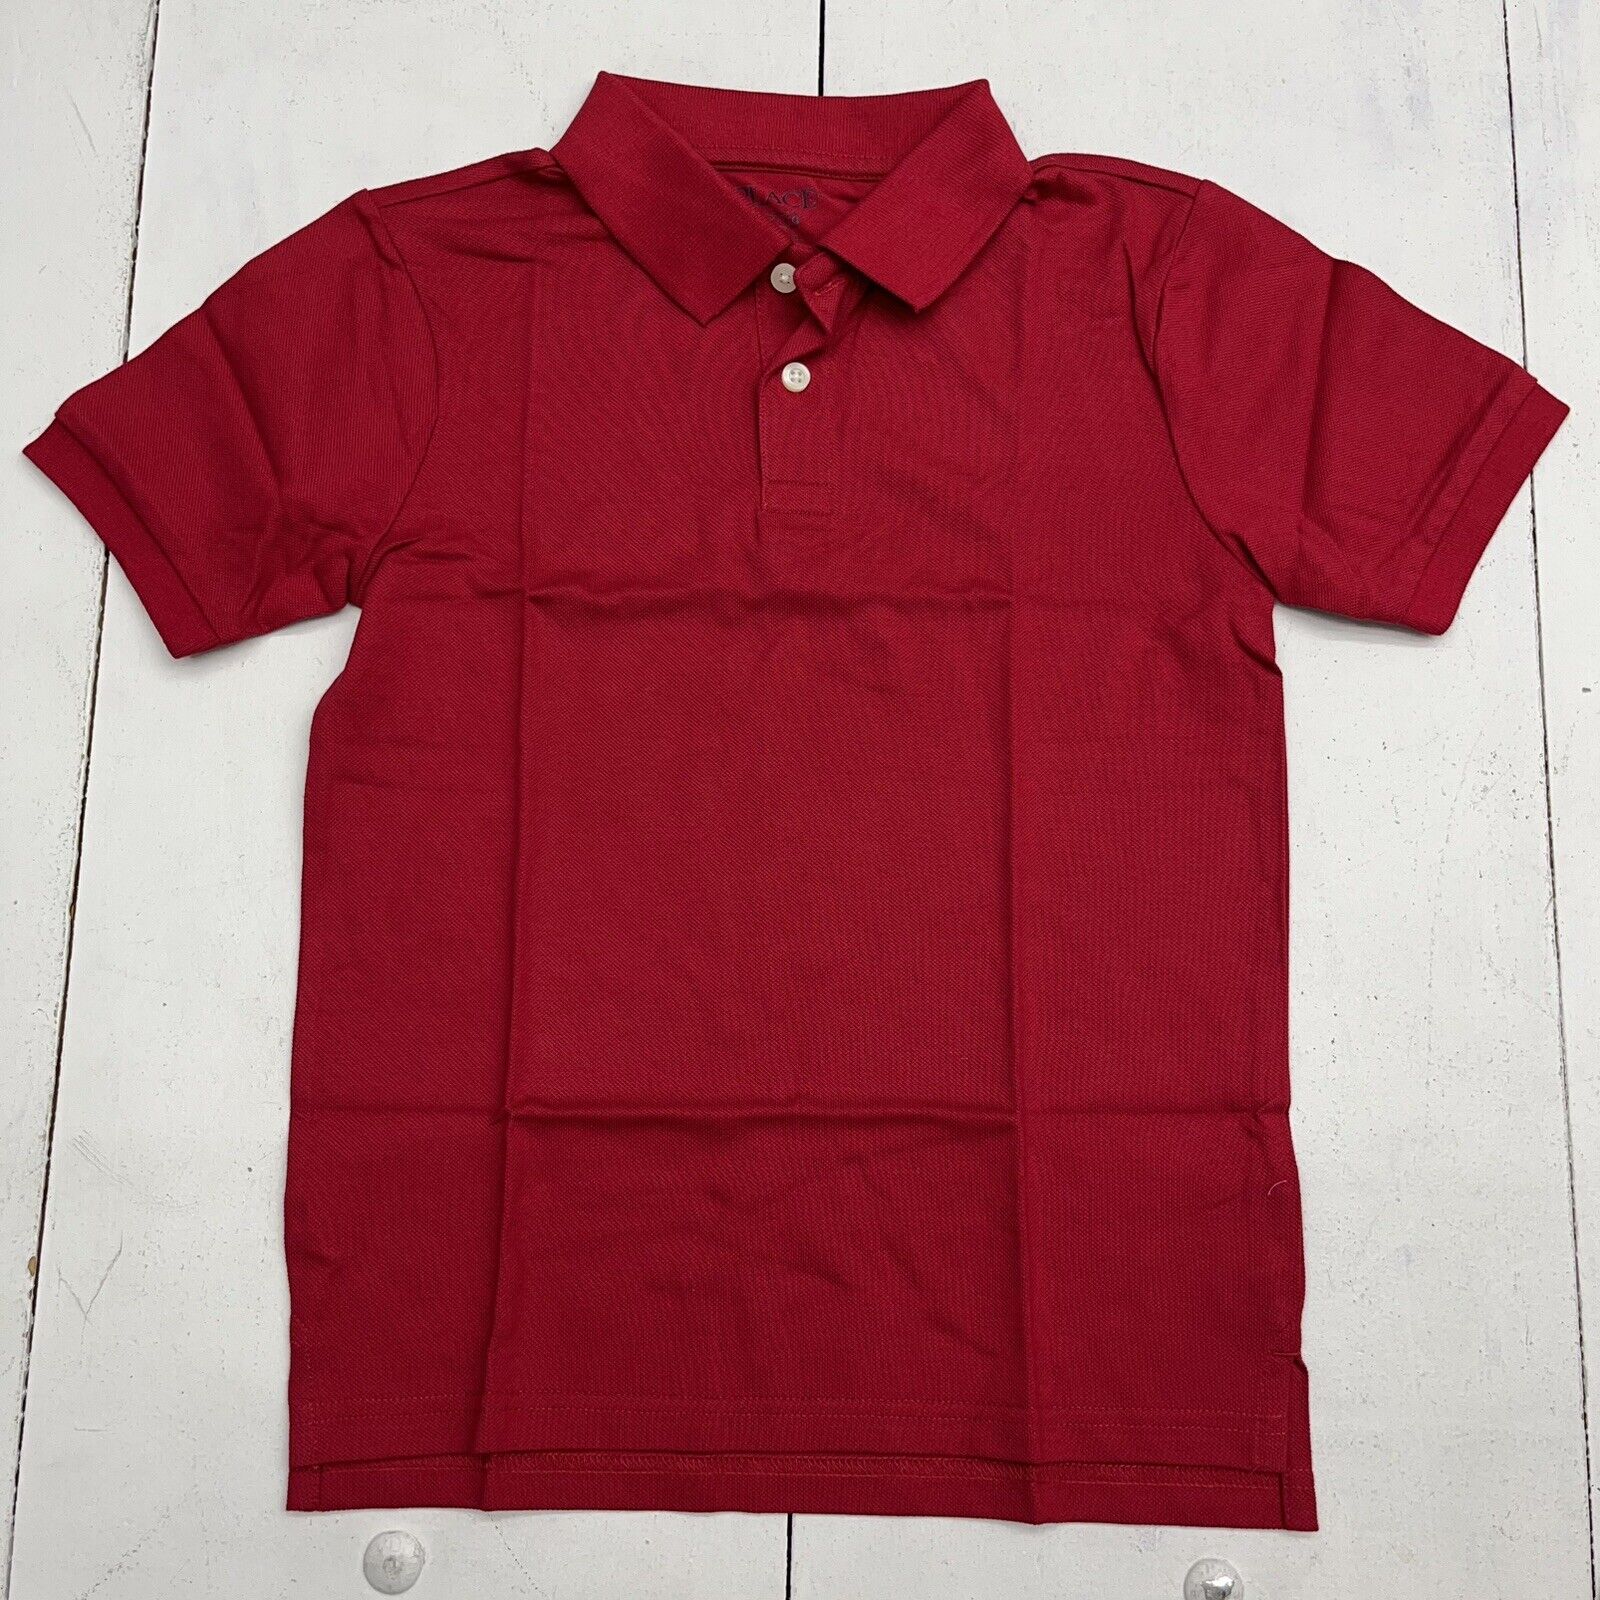 The Children’s Place Classic Red Polo Boys Size Medium (7/8) NEW